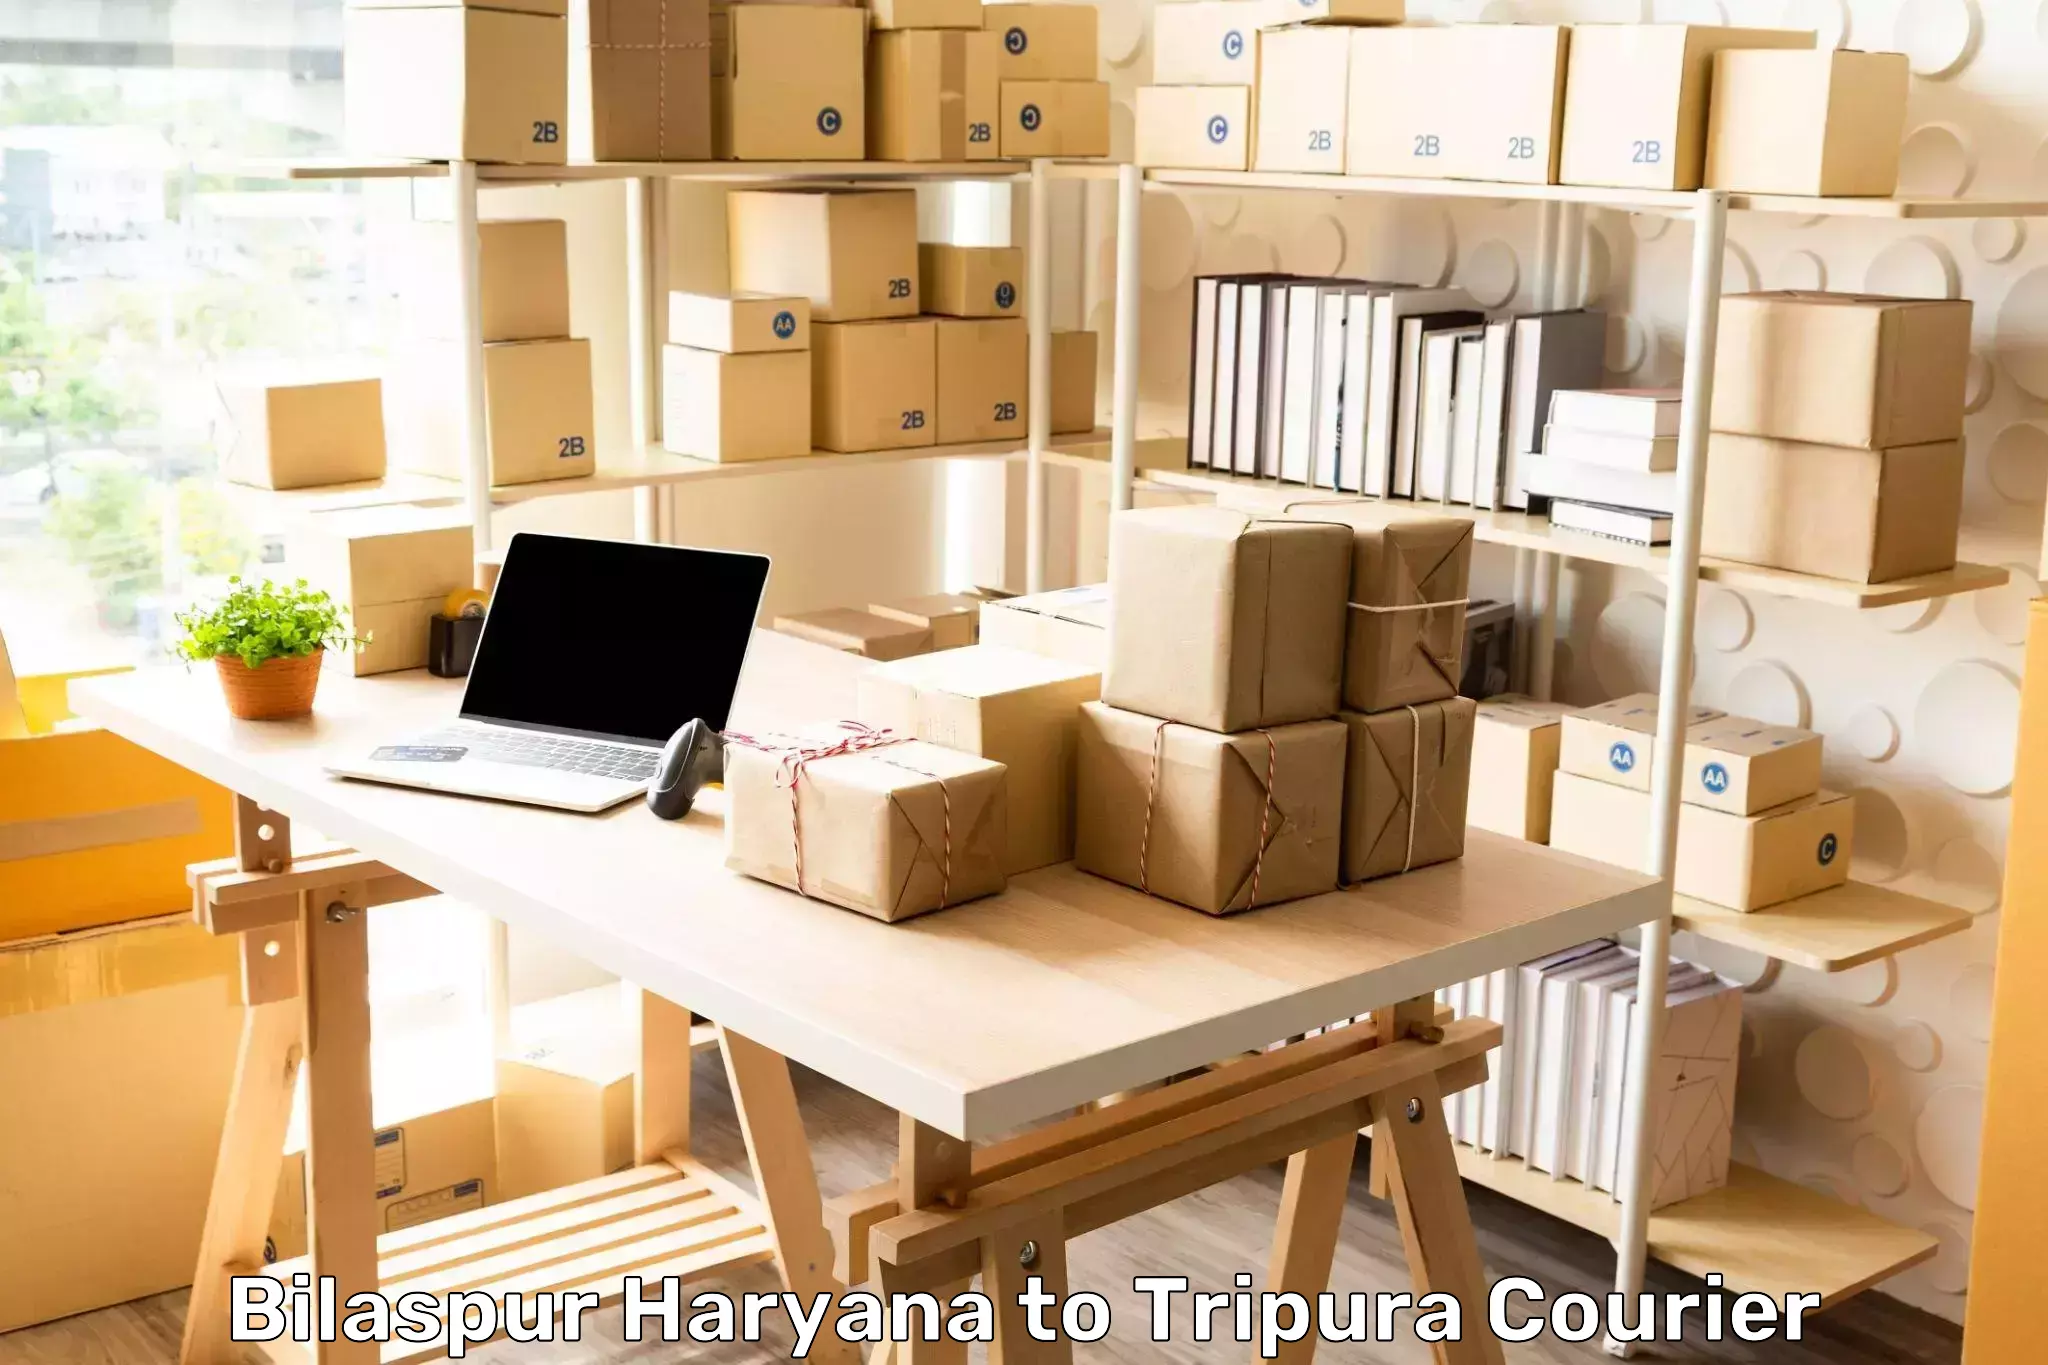 Specialized courier services Bilaspur Haryana to Udaipur Tripura